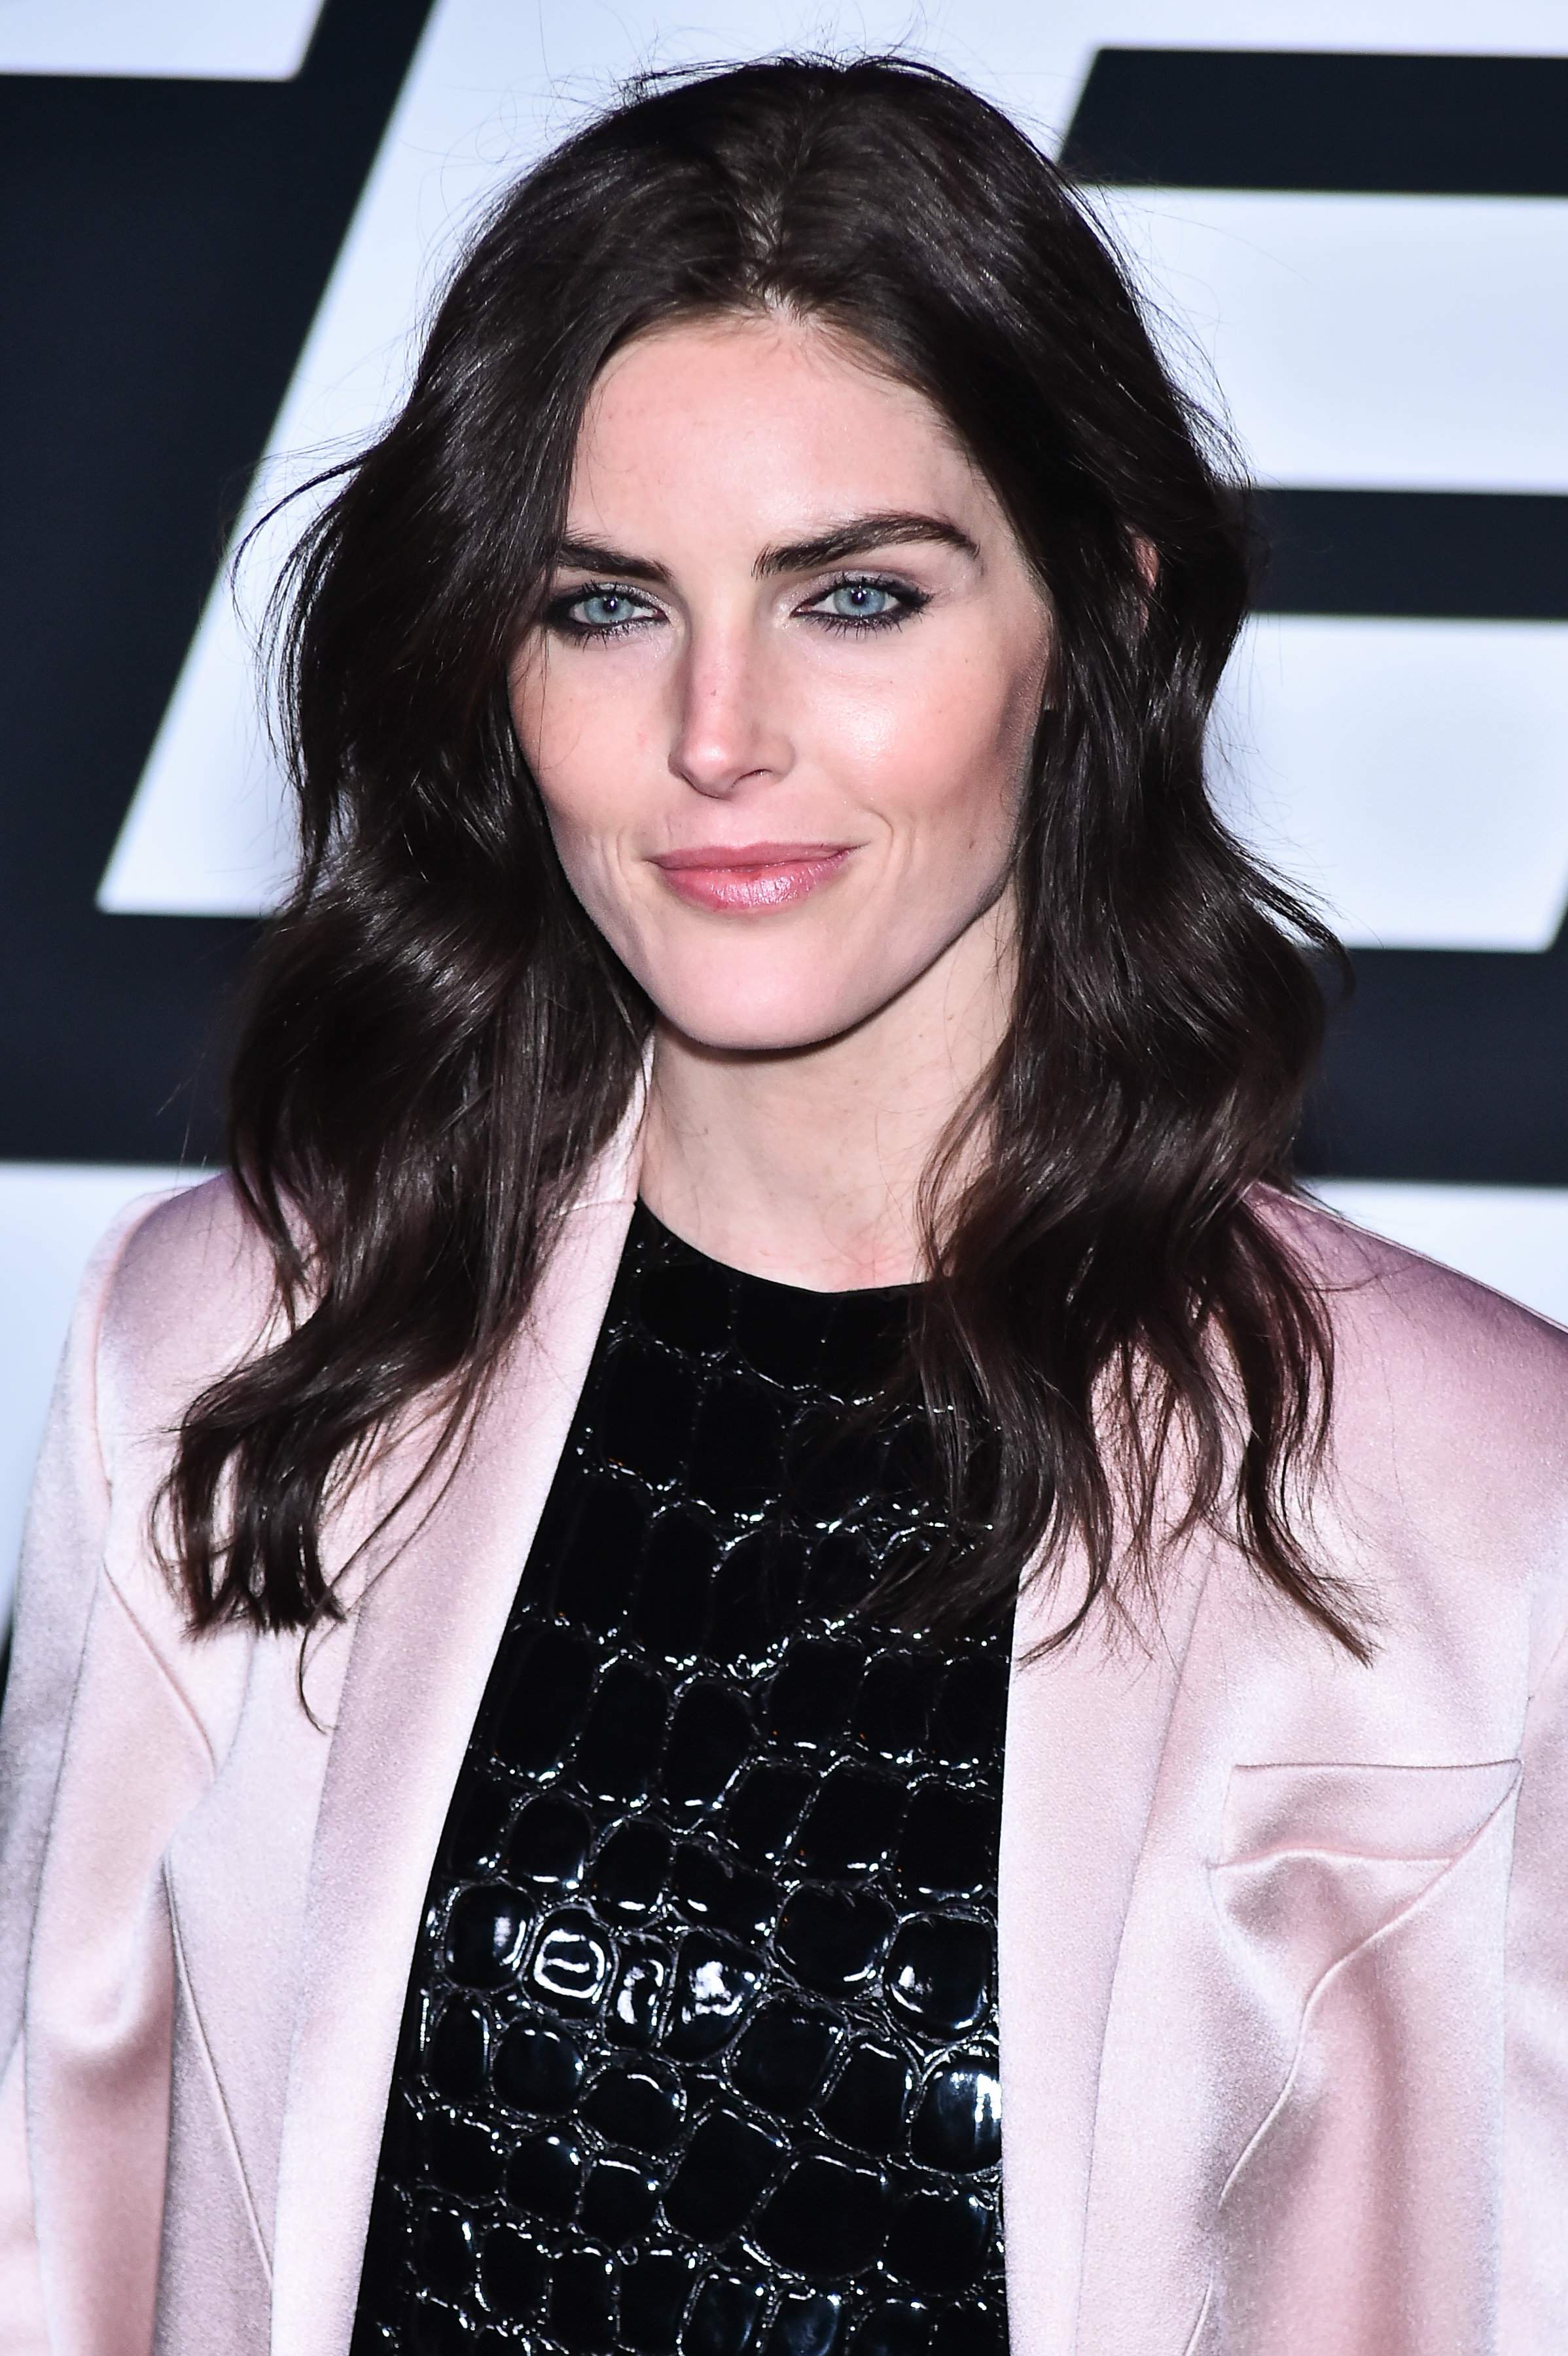 Hilary Rhoda attends The Fate Of The Furious Premiere